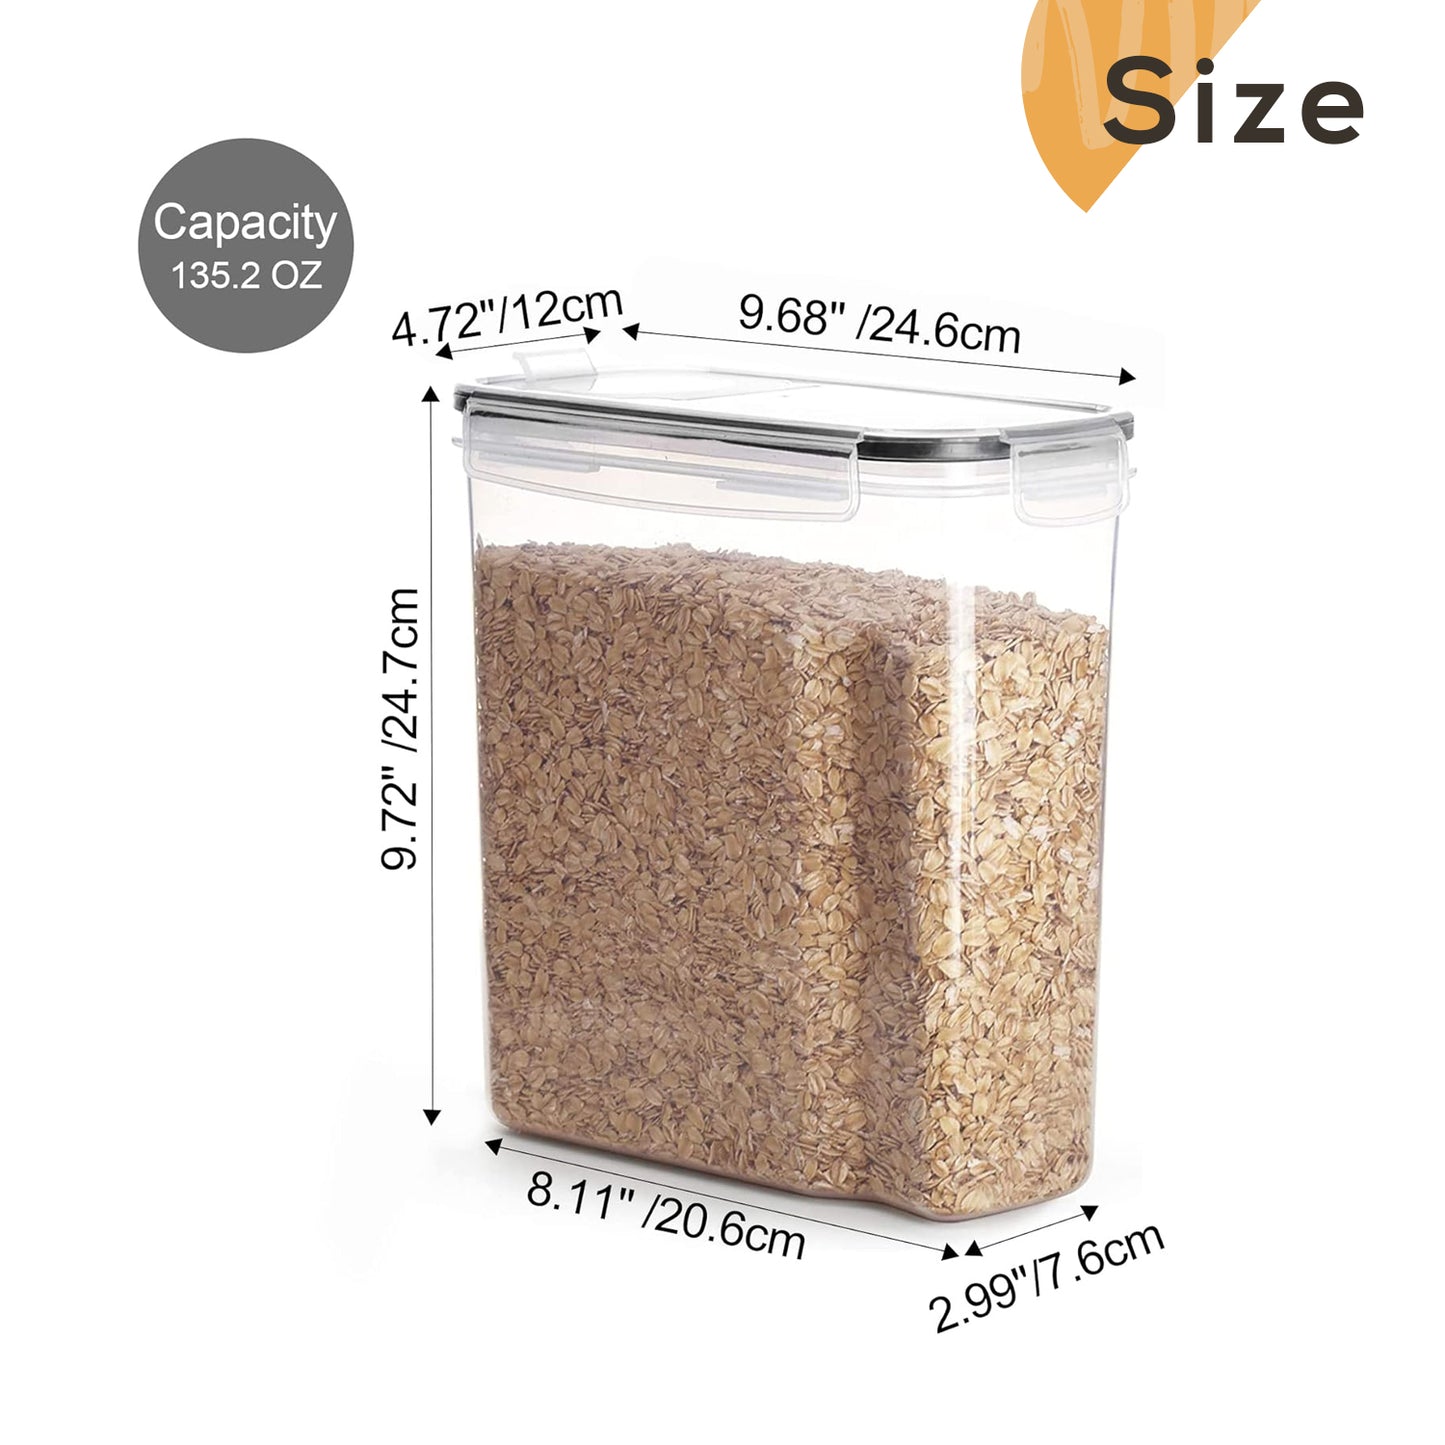 6PCS 4L Cereal Containers Airtight Food Storage for Kitchen and Pantry Organization Canisters for, Dry Pet Food, Flour, Sugar, Rice, Nuts, Snacks & More